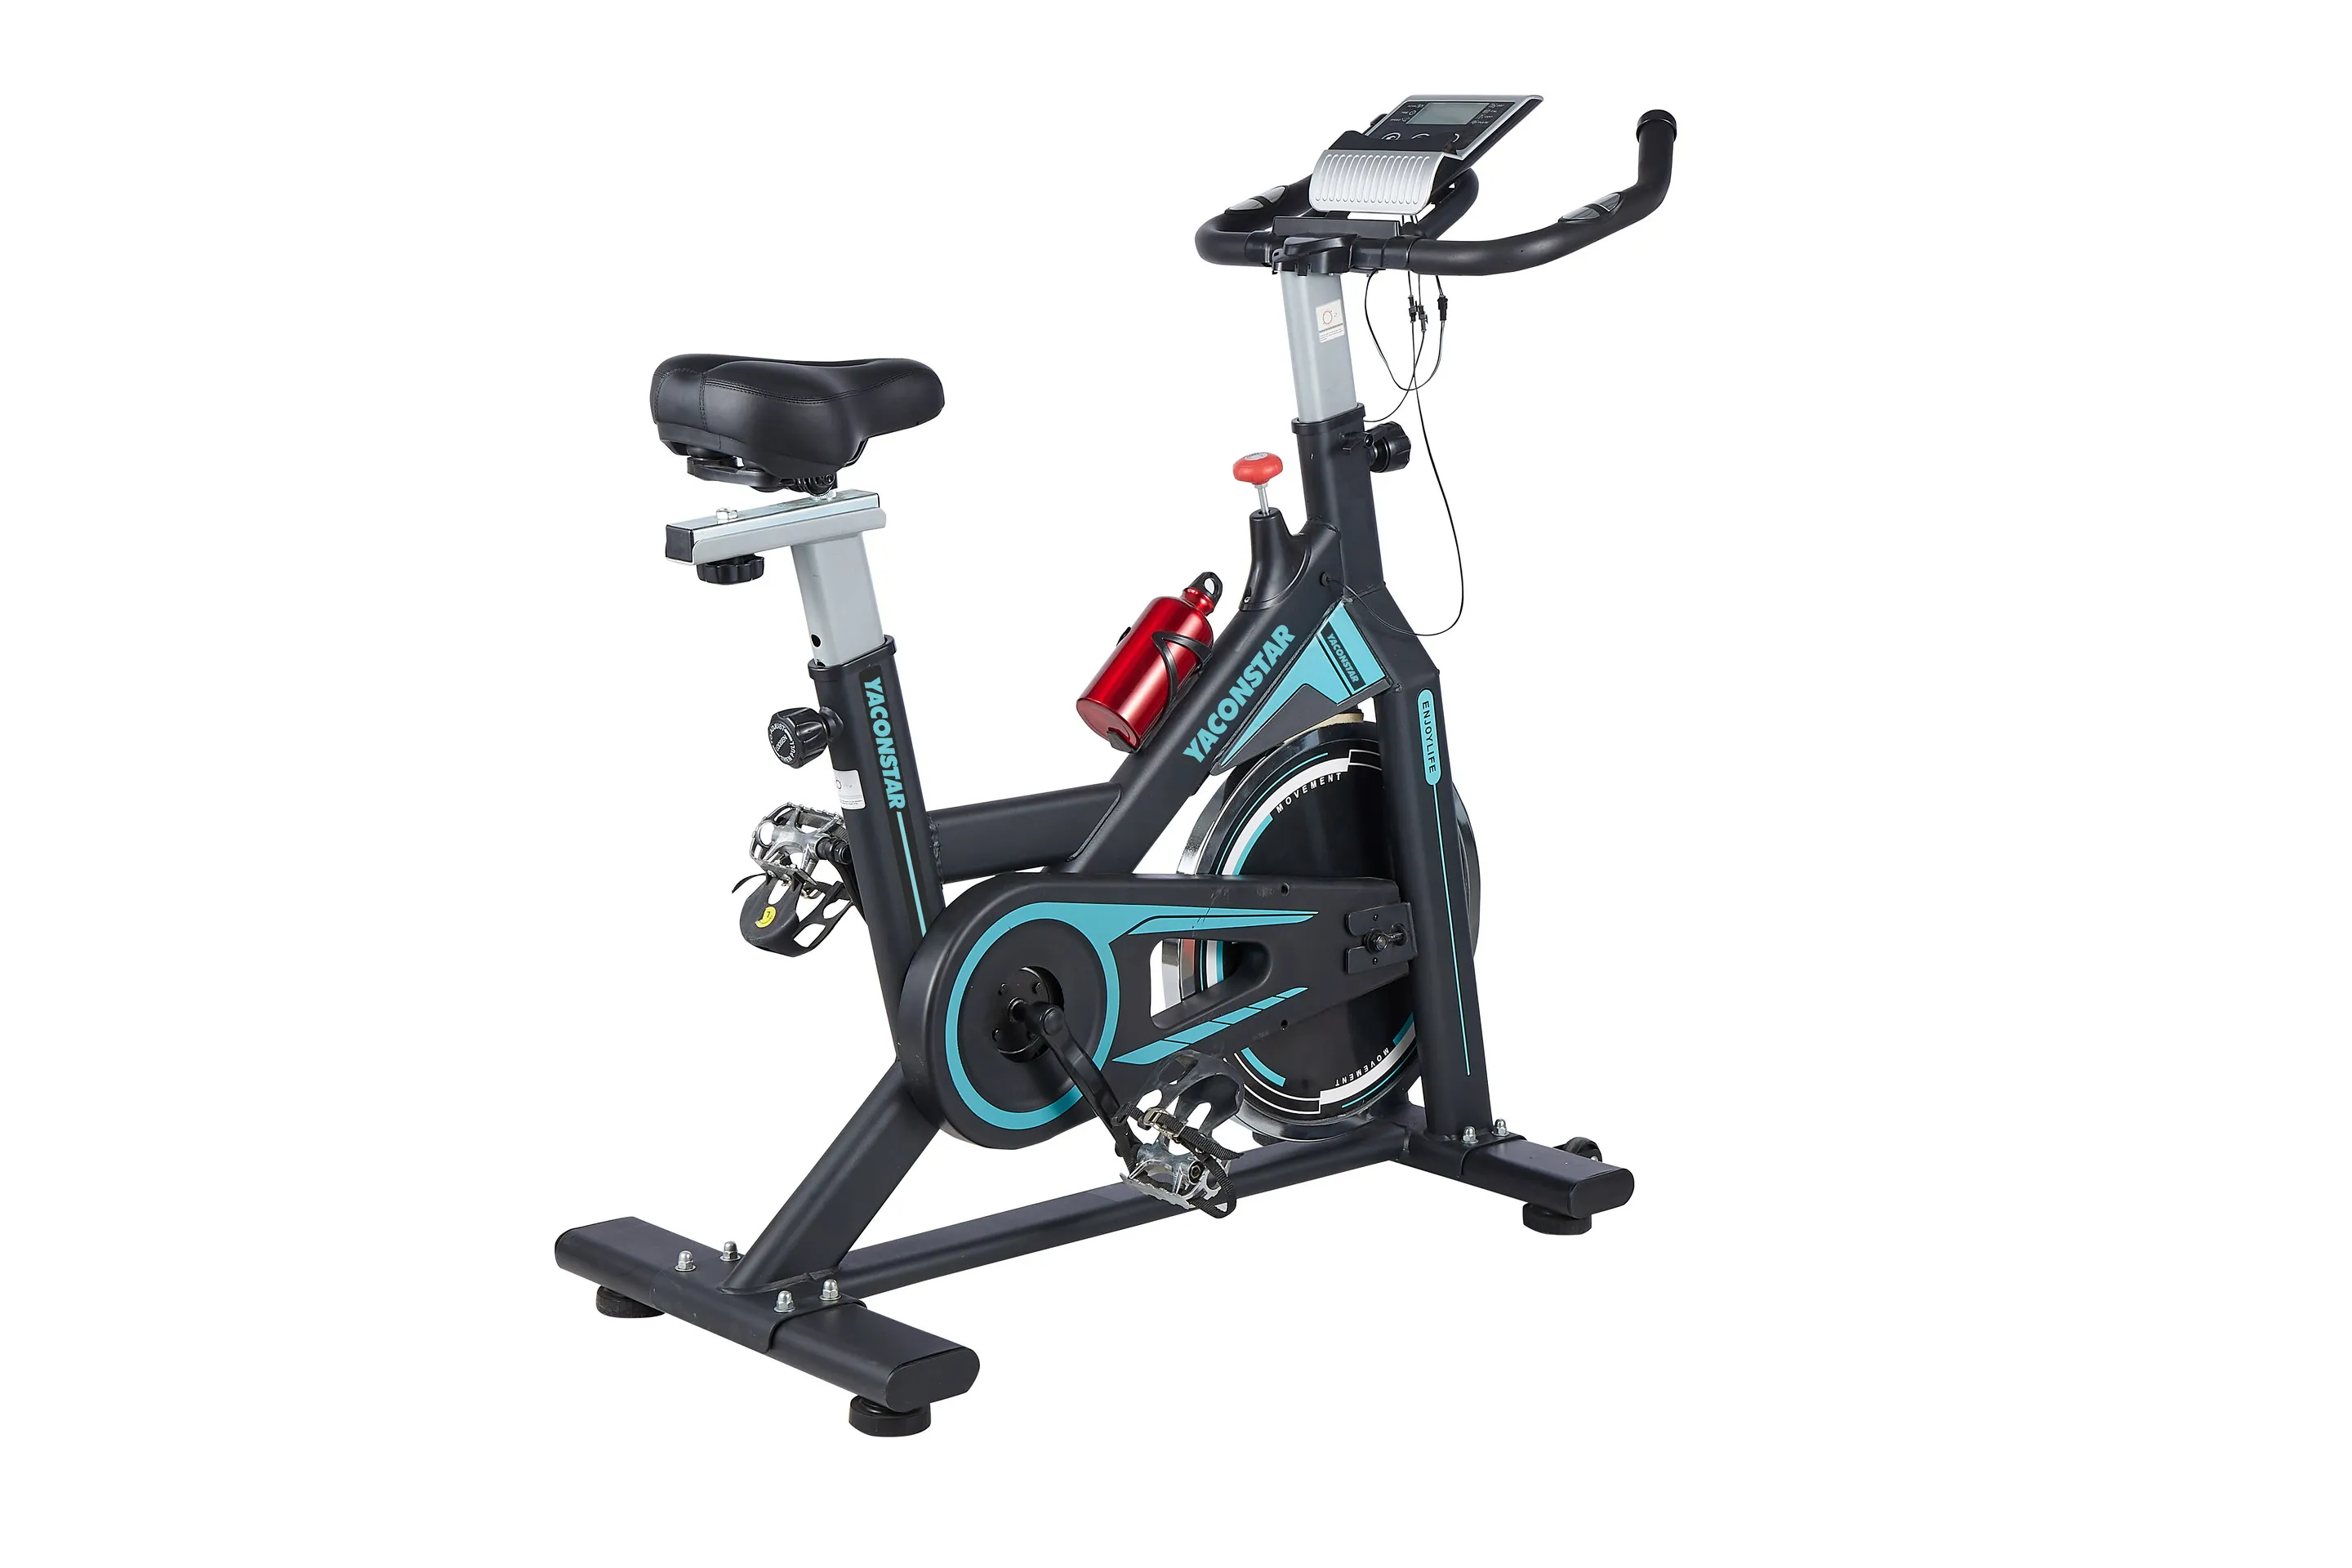 Hot Sale Indoor Home Spin Exercise Bikes Fitness Equipment Spinning Bike With Screen And 6 8 10 13kg Flywheel Choice